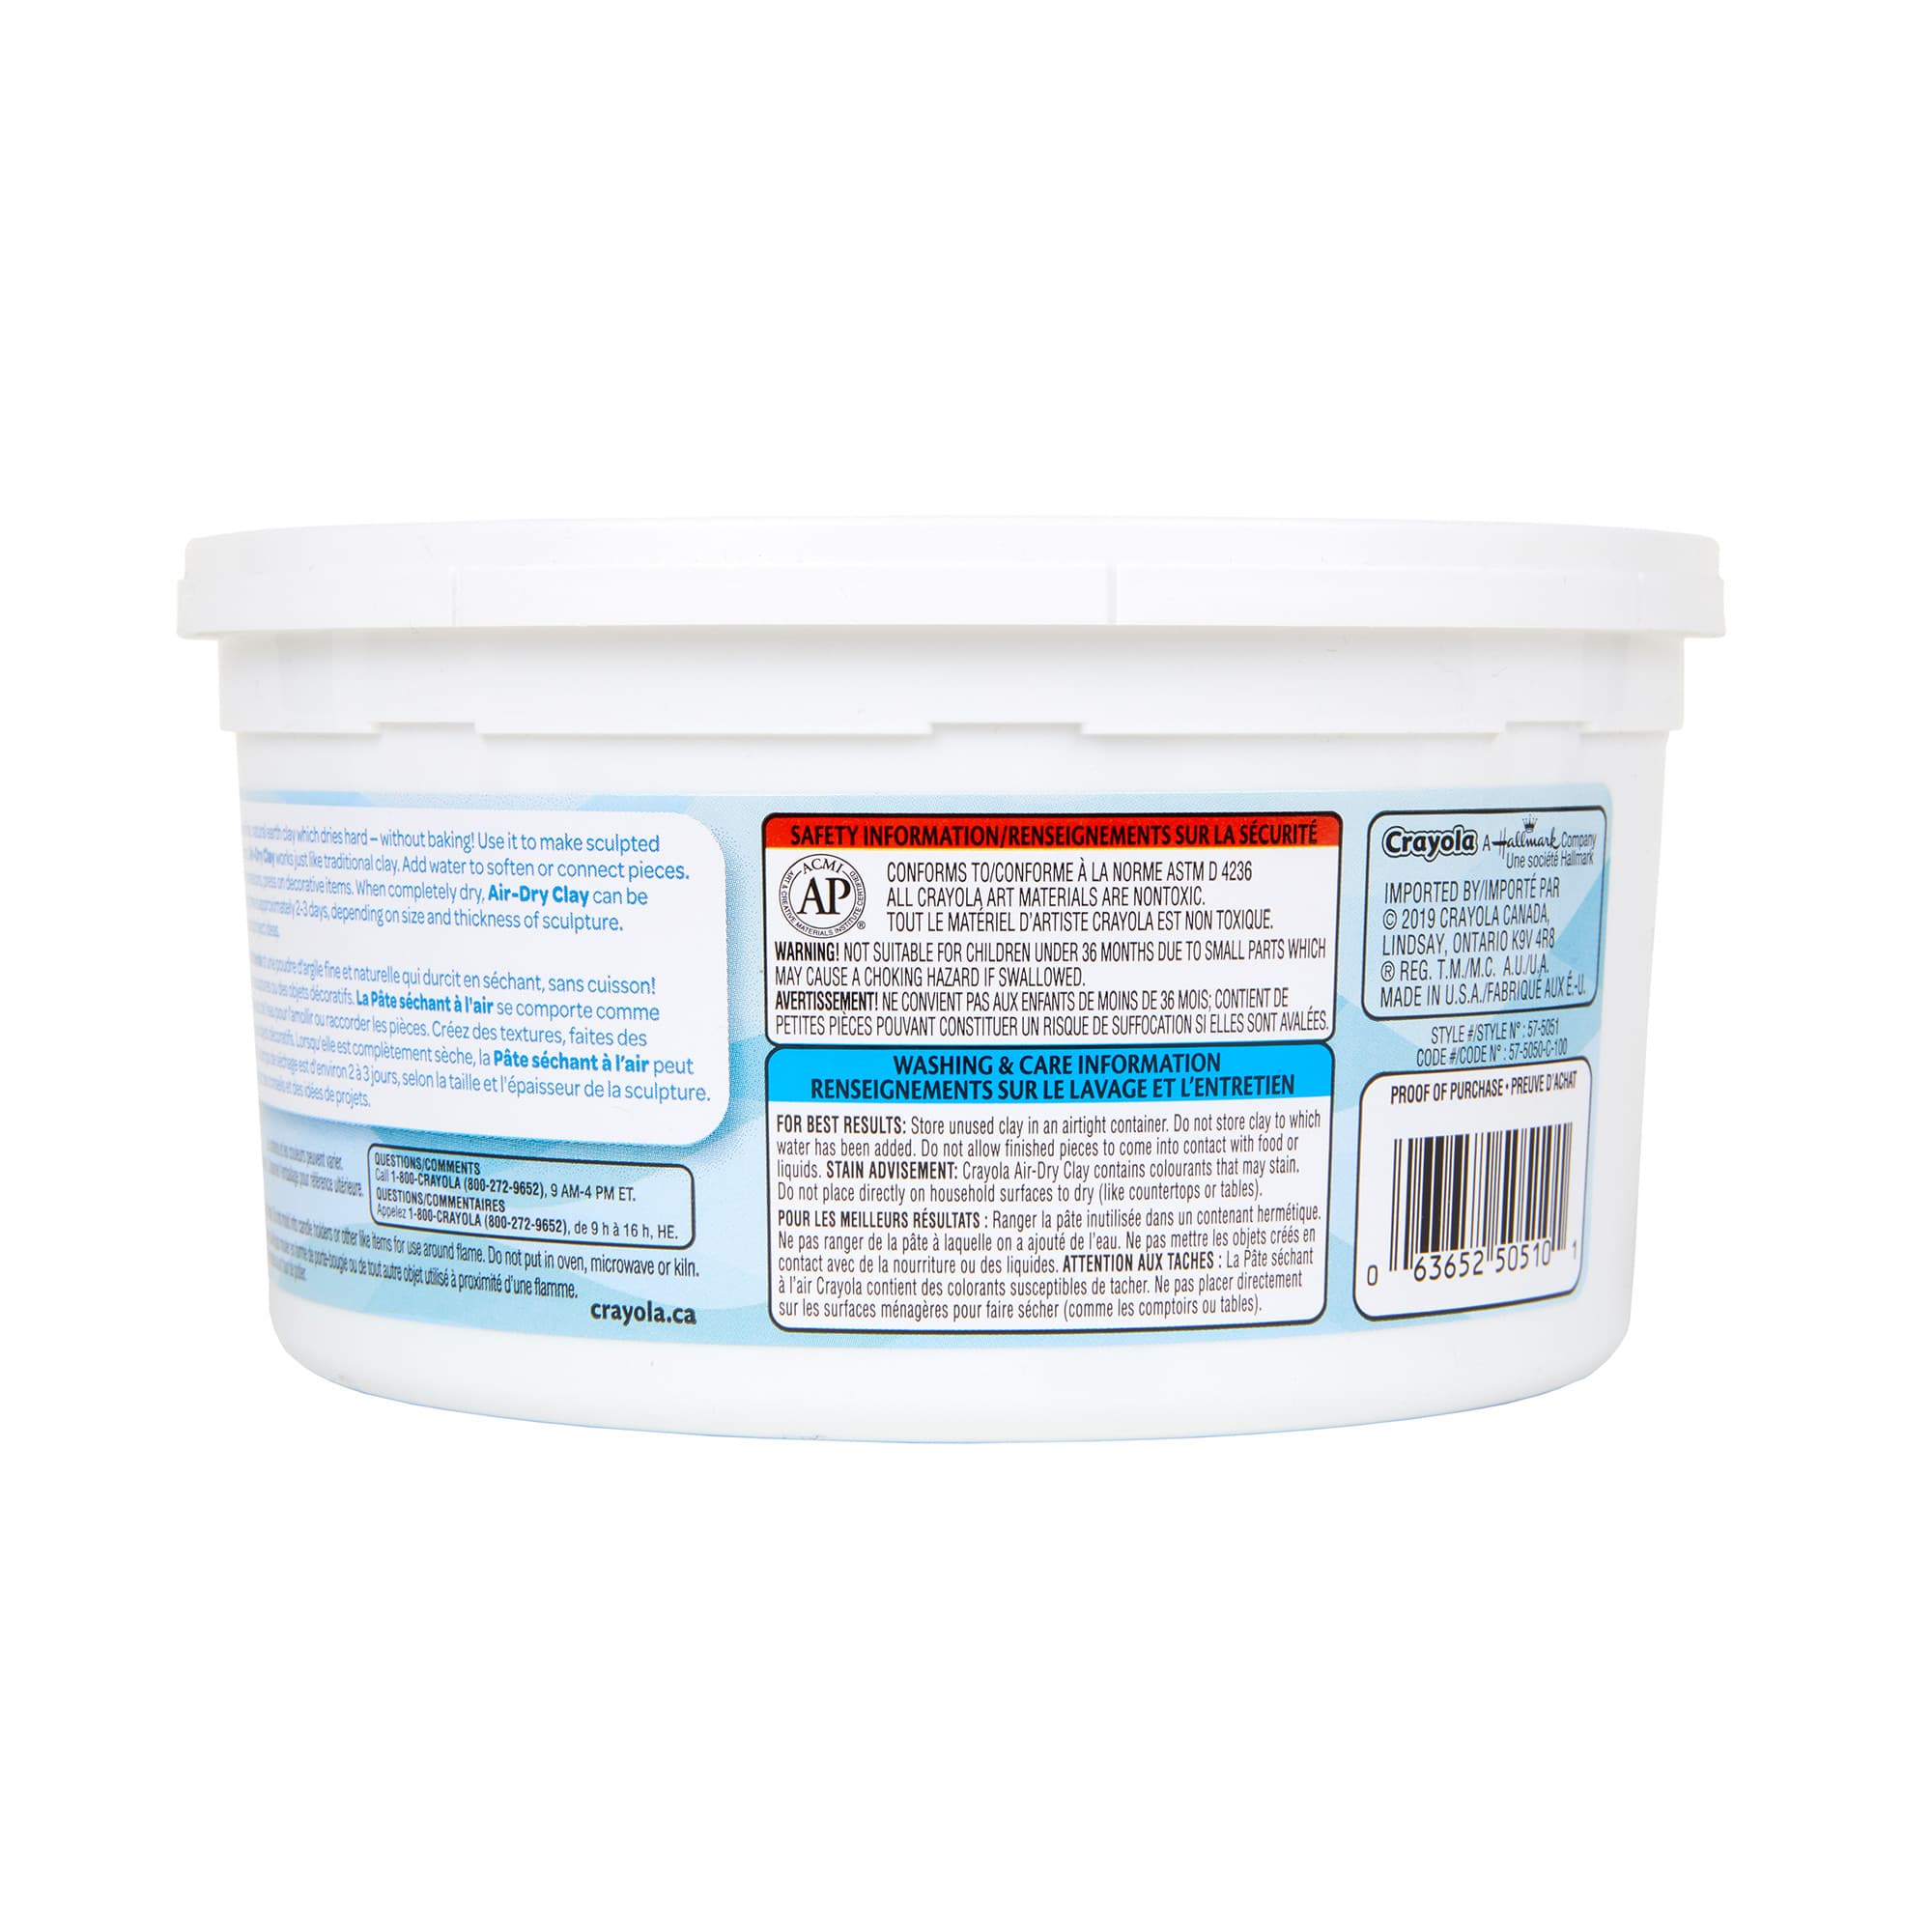 Crayola Air Dry Clay White 2.5 Lb Tub - Office Depot